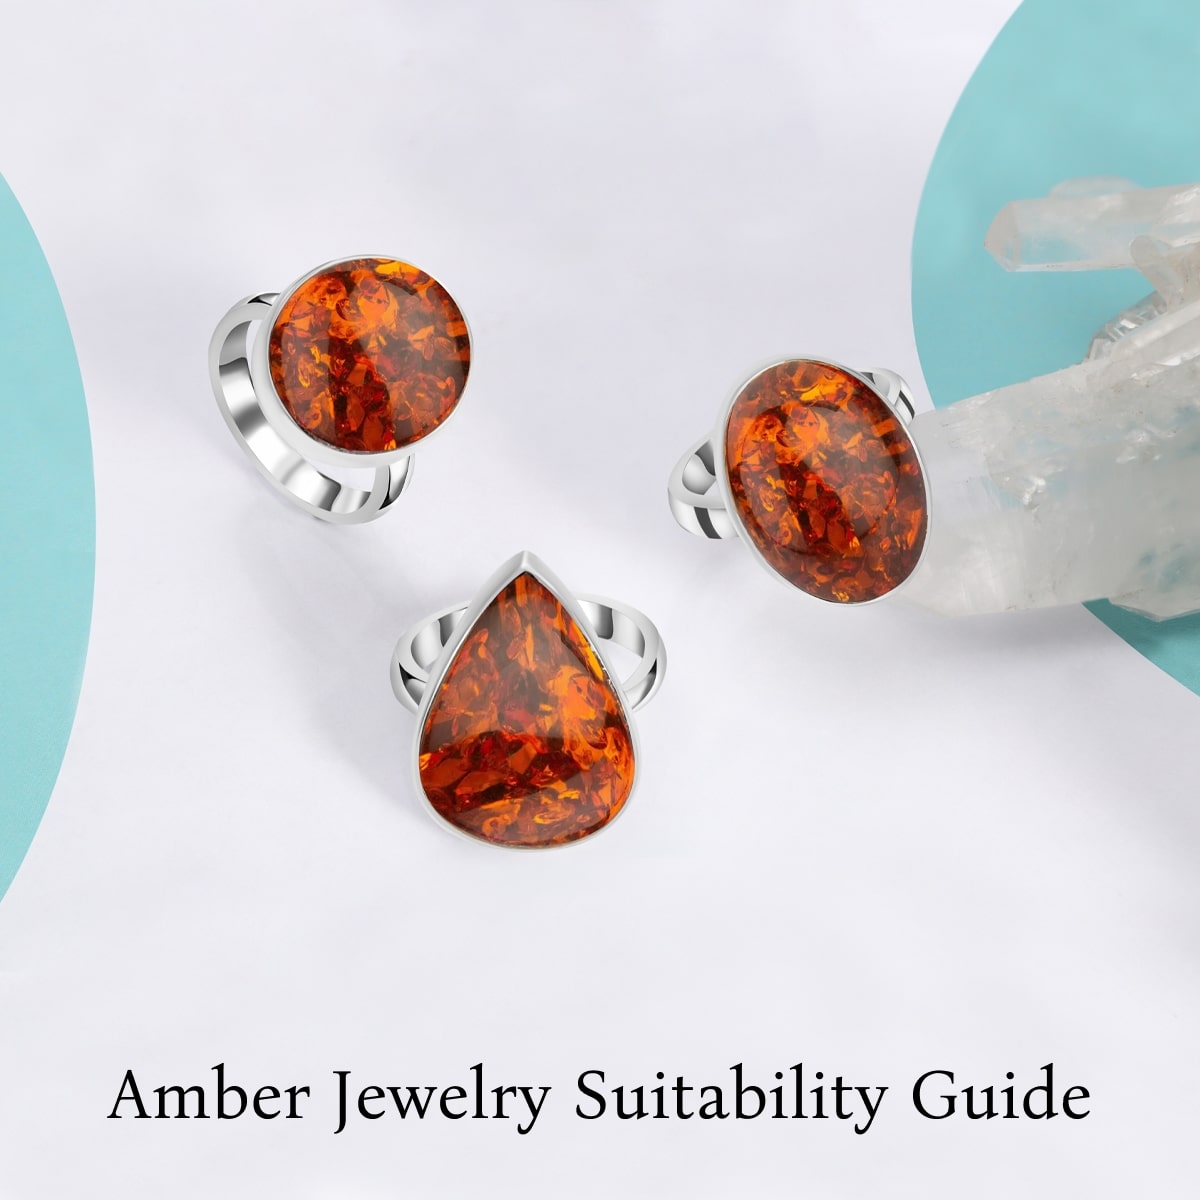 Who Should Wear The Amber Jewelry